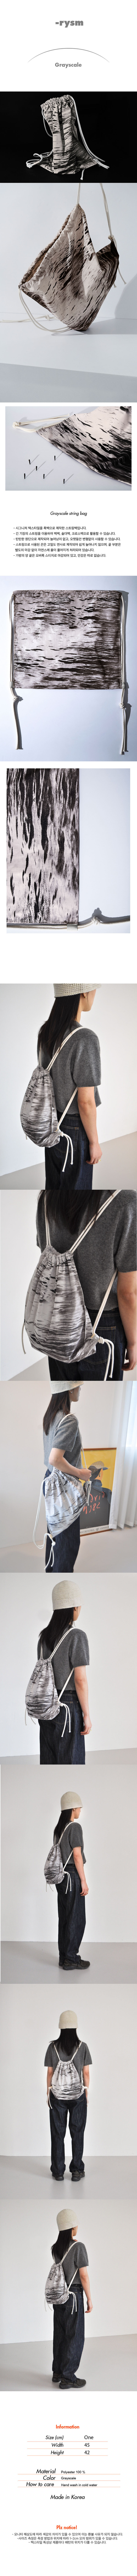 Gray scale string bag